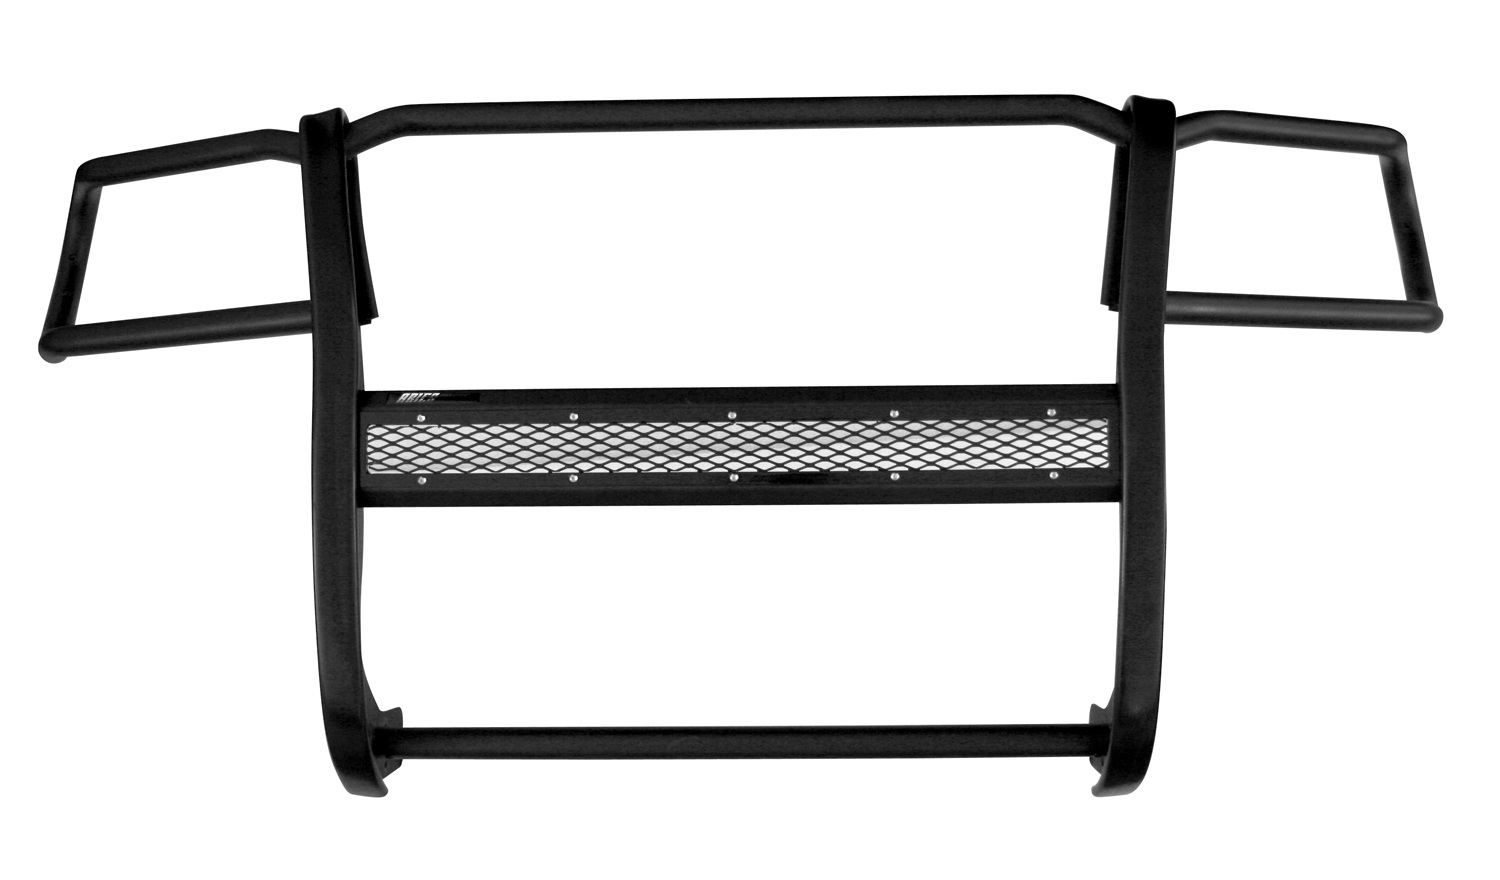 Aries Offroad Aries Offroad P2054 Pro Series; Grill Guard Fits 05-14 Tacoma